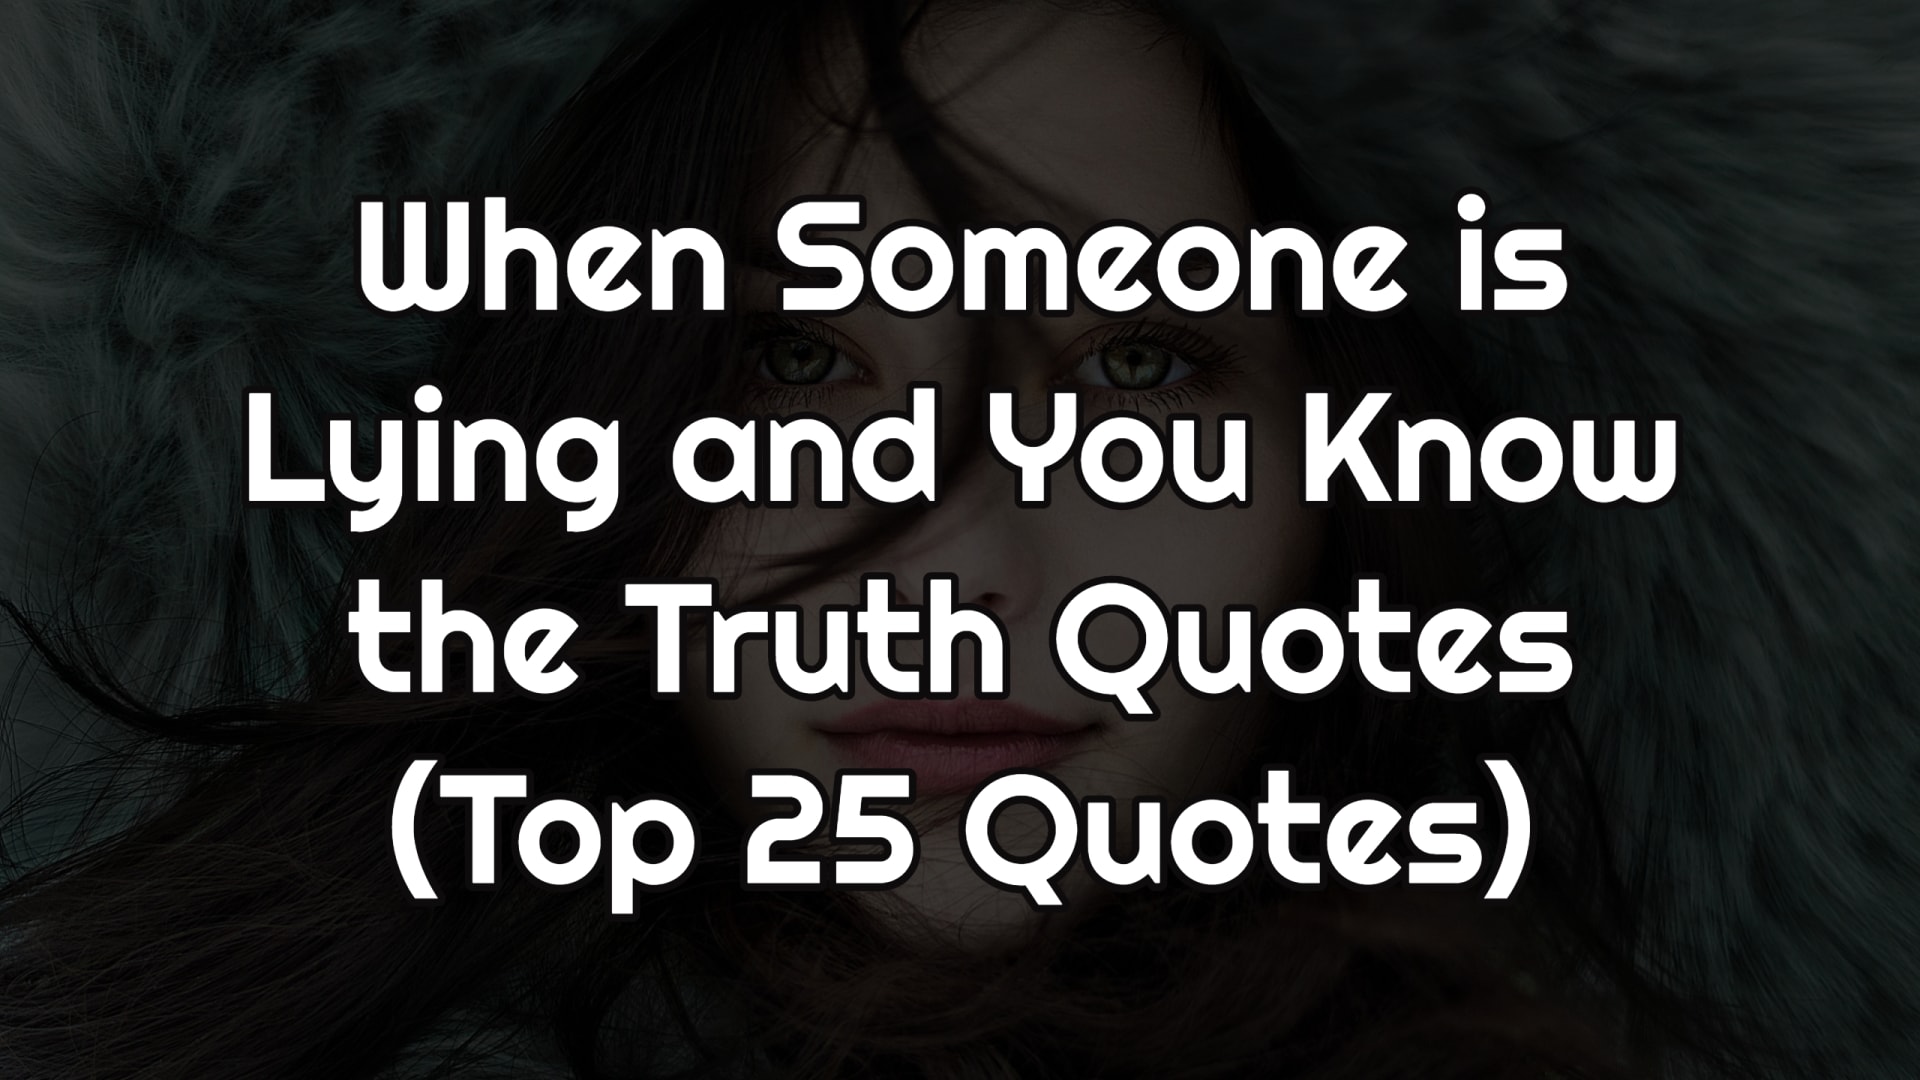 When Someone is Lying and You Know the Truth Quotes (Top 25 Quotes)